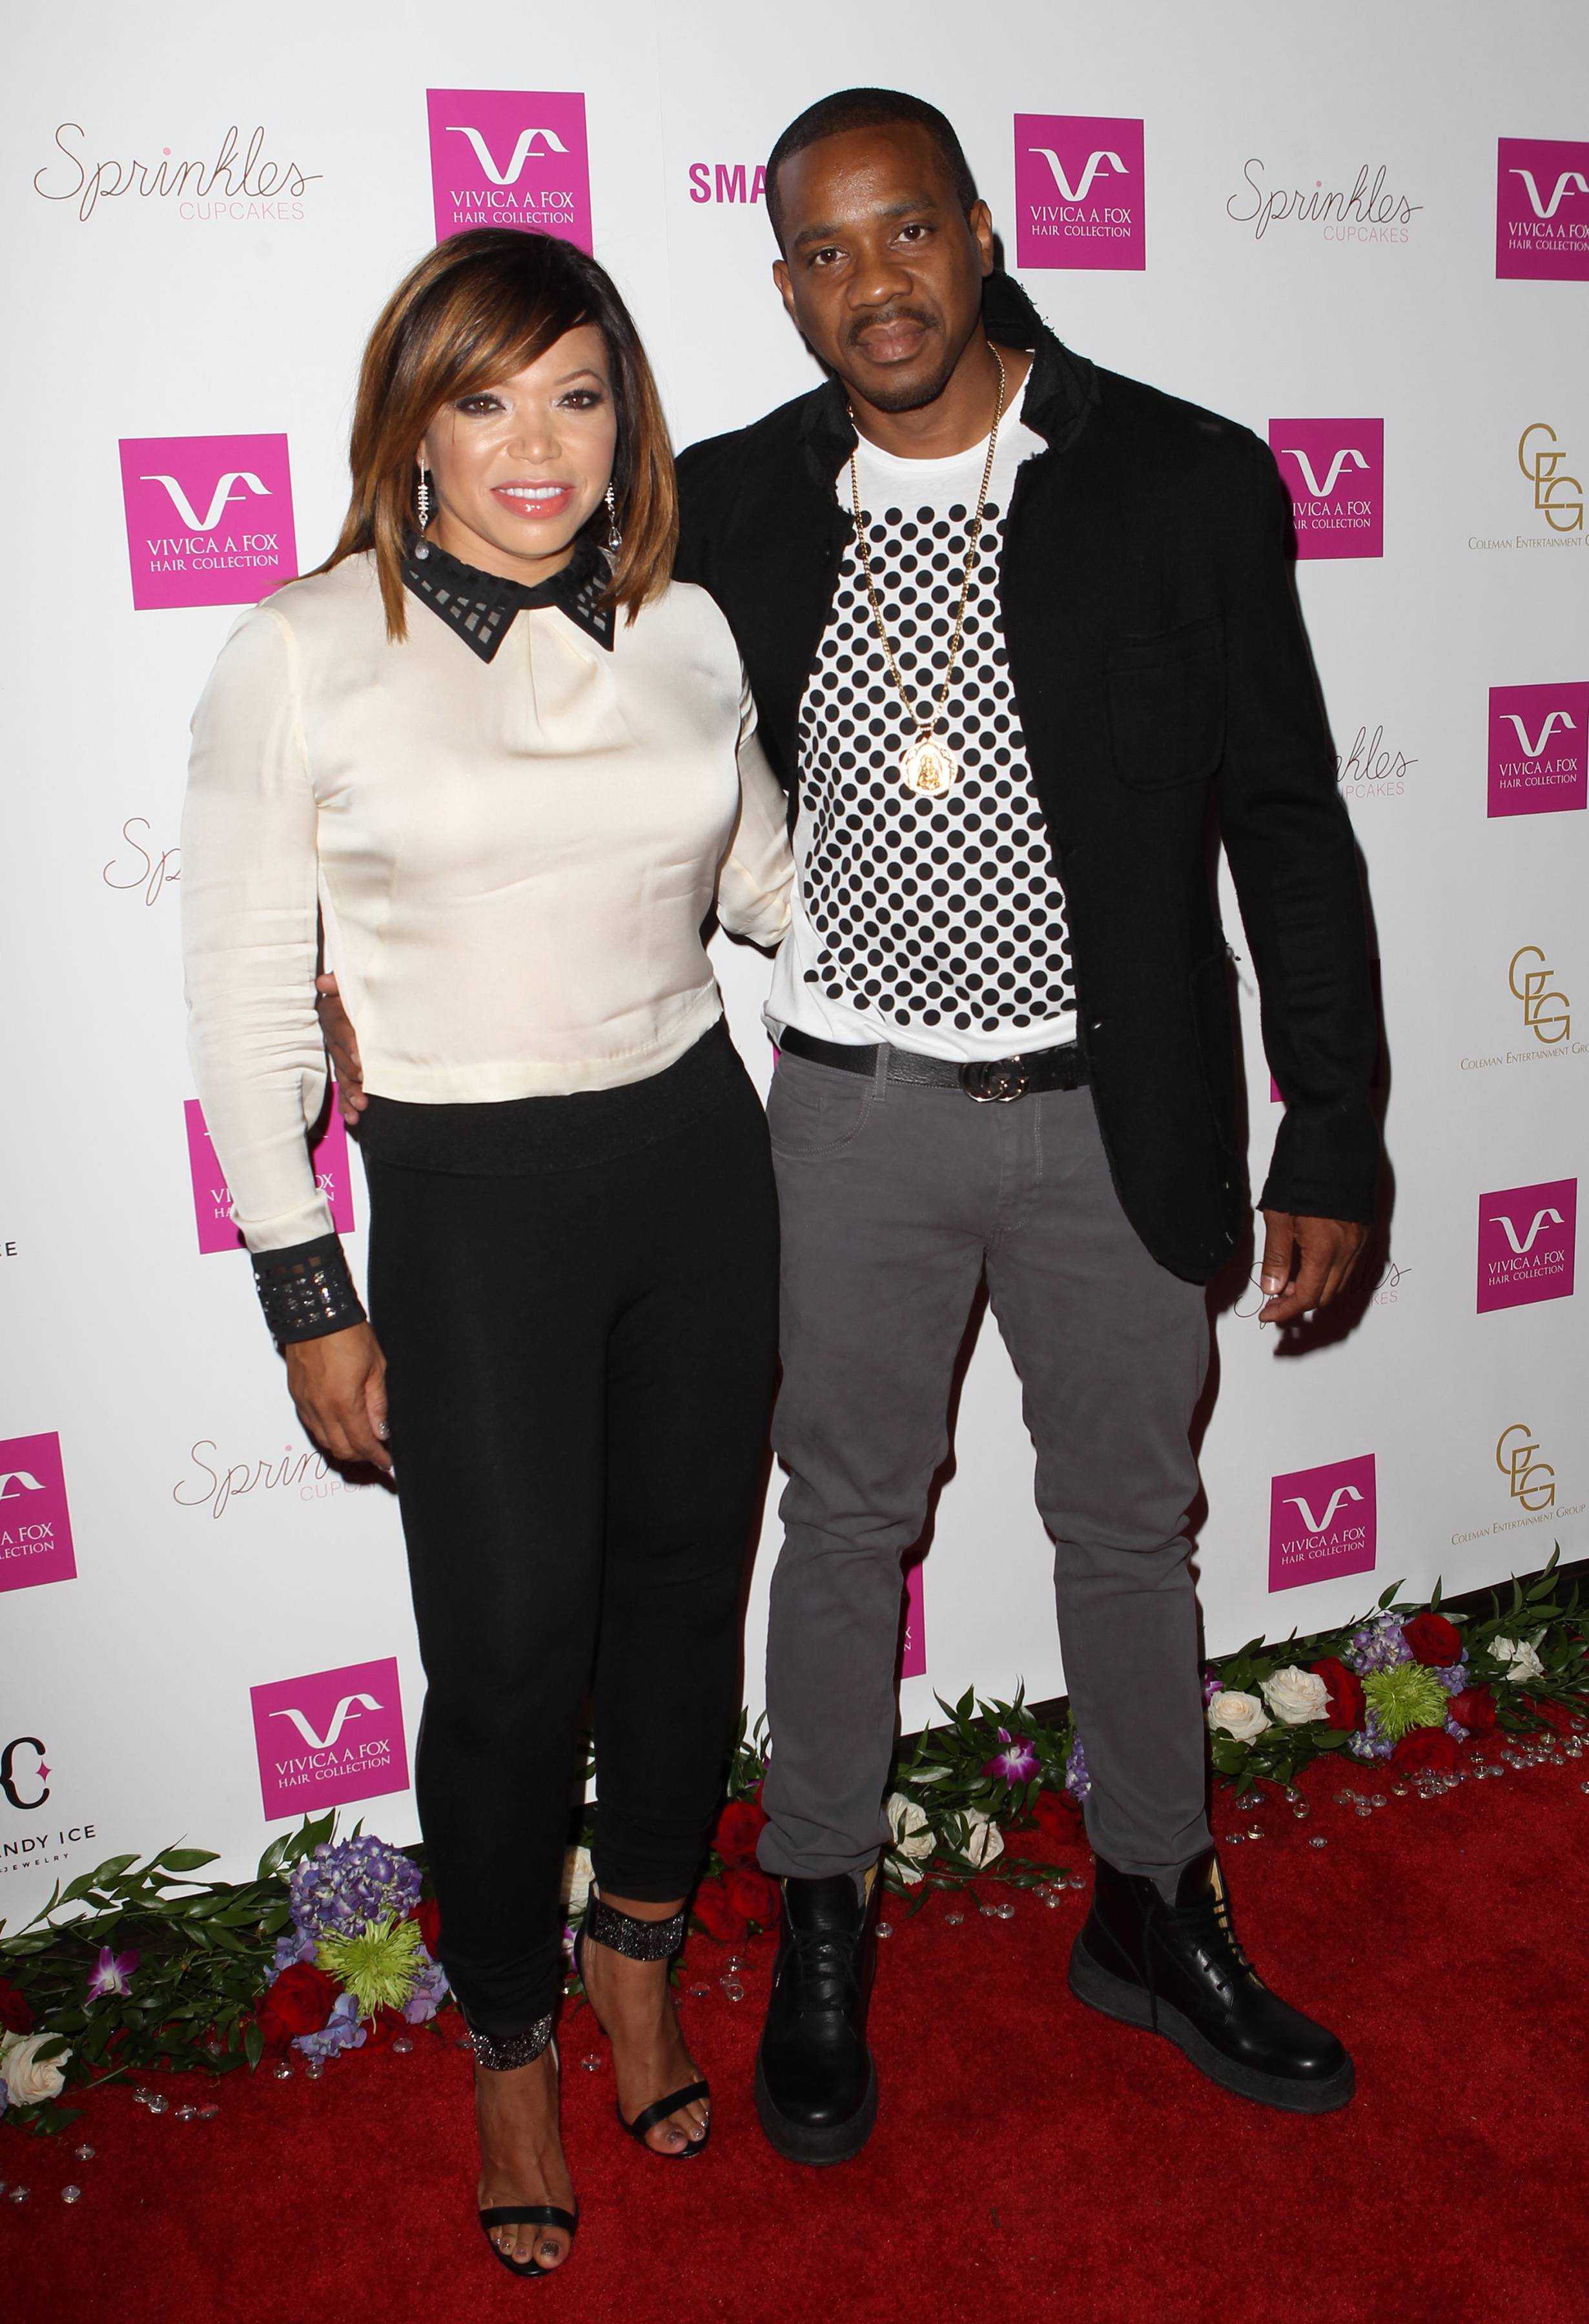 Be Smarter With Your Coin - Recently, Tisha Campbell-Martin and her hubby Duane Martin filed for bankruptcy, claiming that they only have $200 to their name. While they are celebs, there are some lessons to be learned on how to live among your means and not get buck wild with your spending. Ready to learn? By Kellee Terrell(Photo:&nbsp;F.Sadou/AdMedia/AdMedia/Corbis)